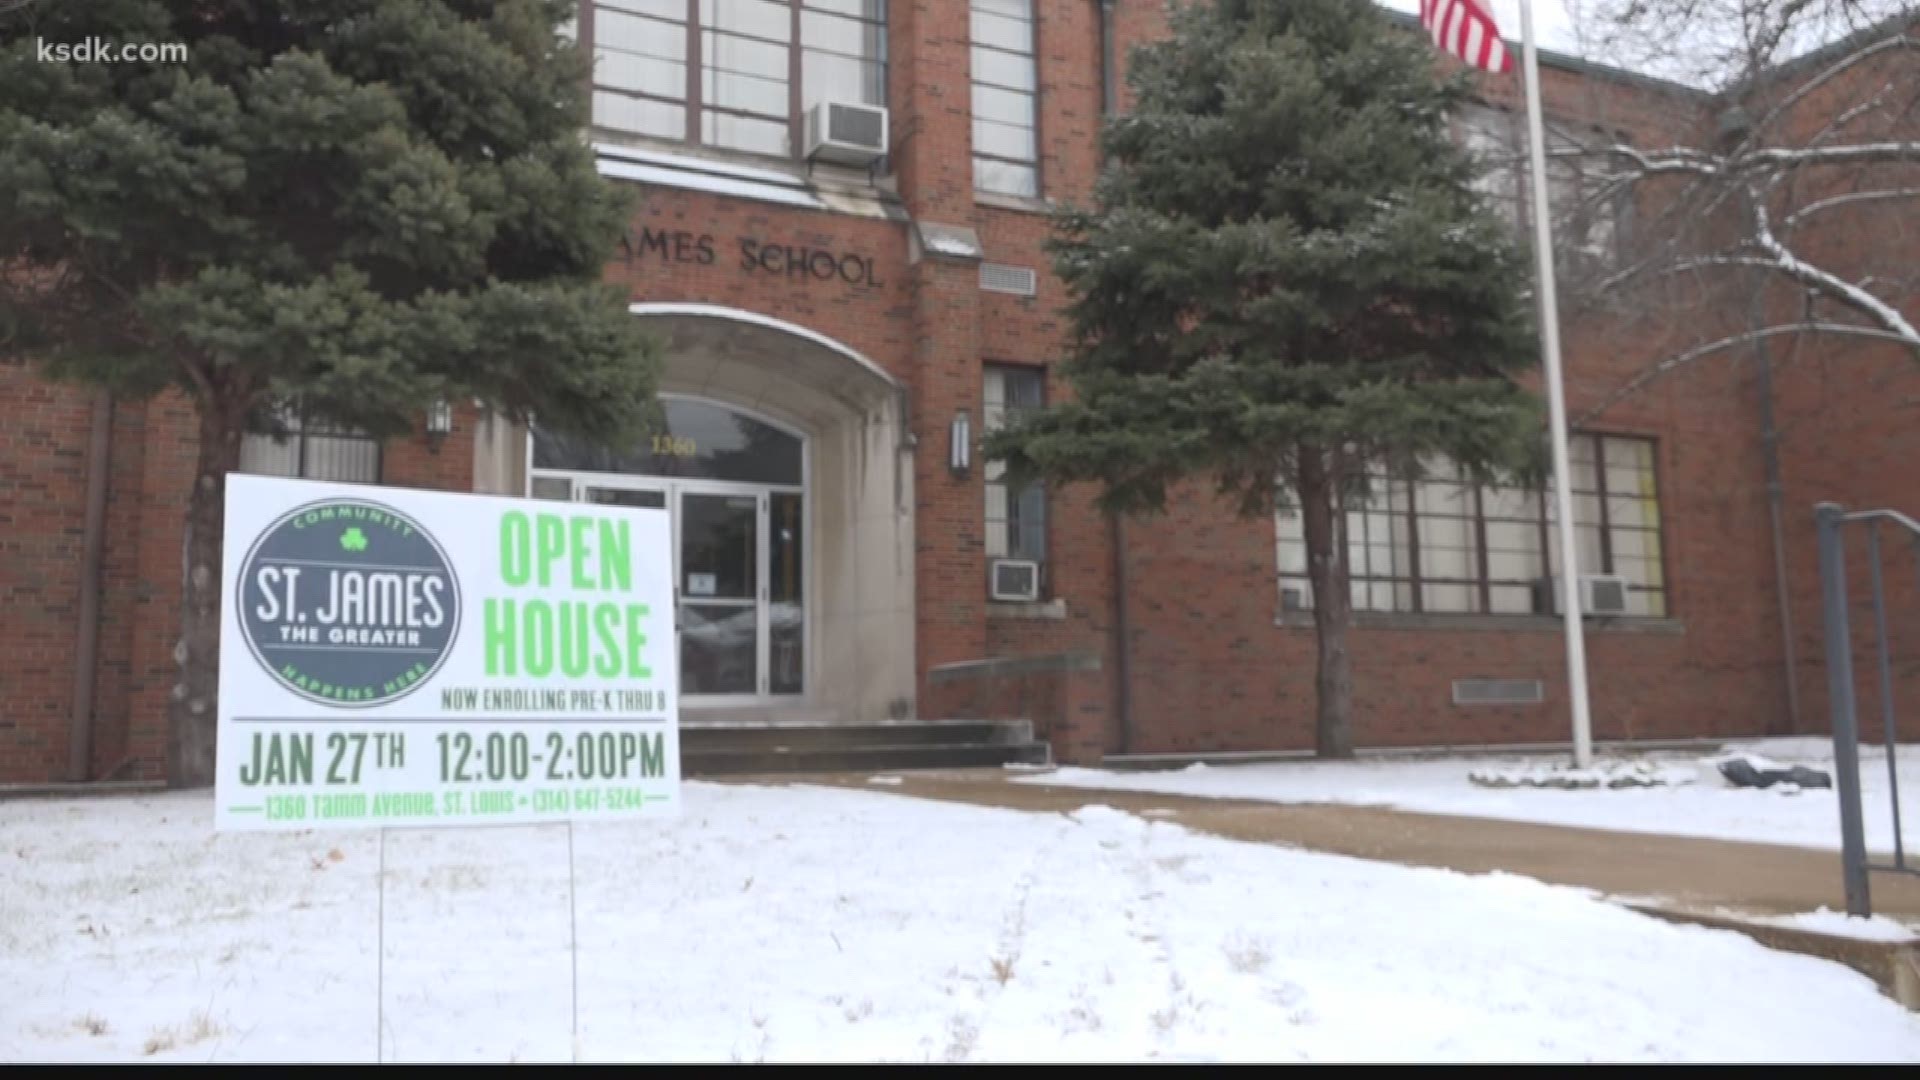 Despite a huge fundraising effort in the area two years ago, the school will have to close down.